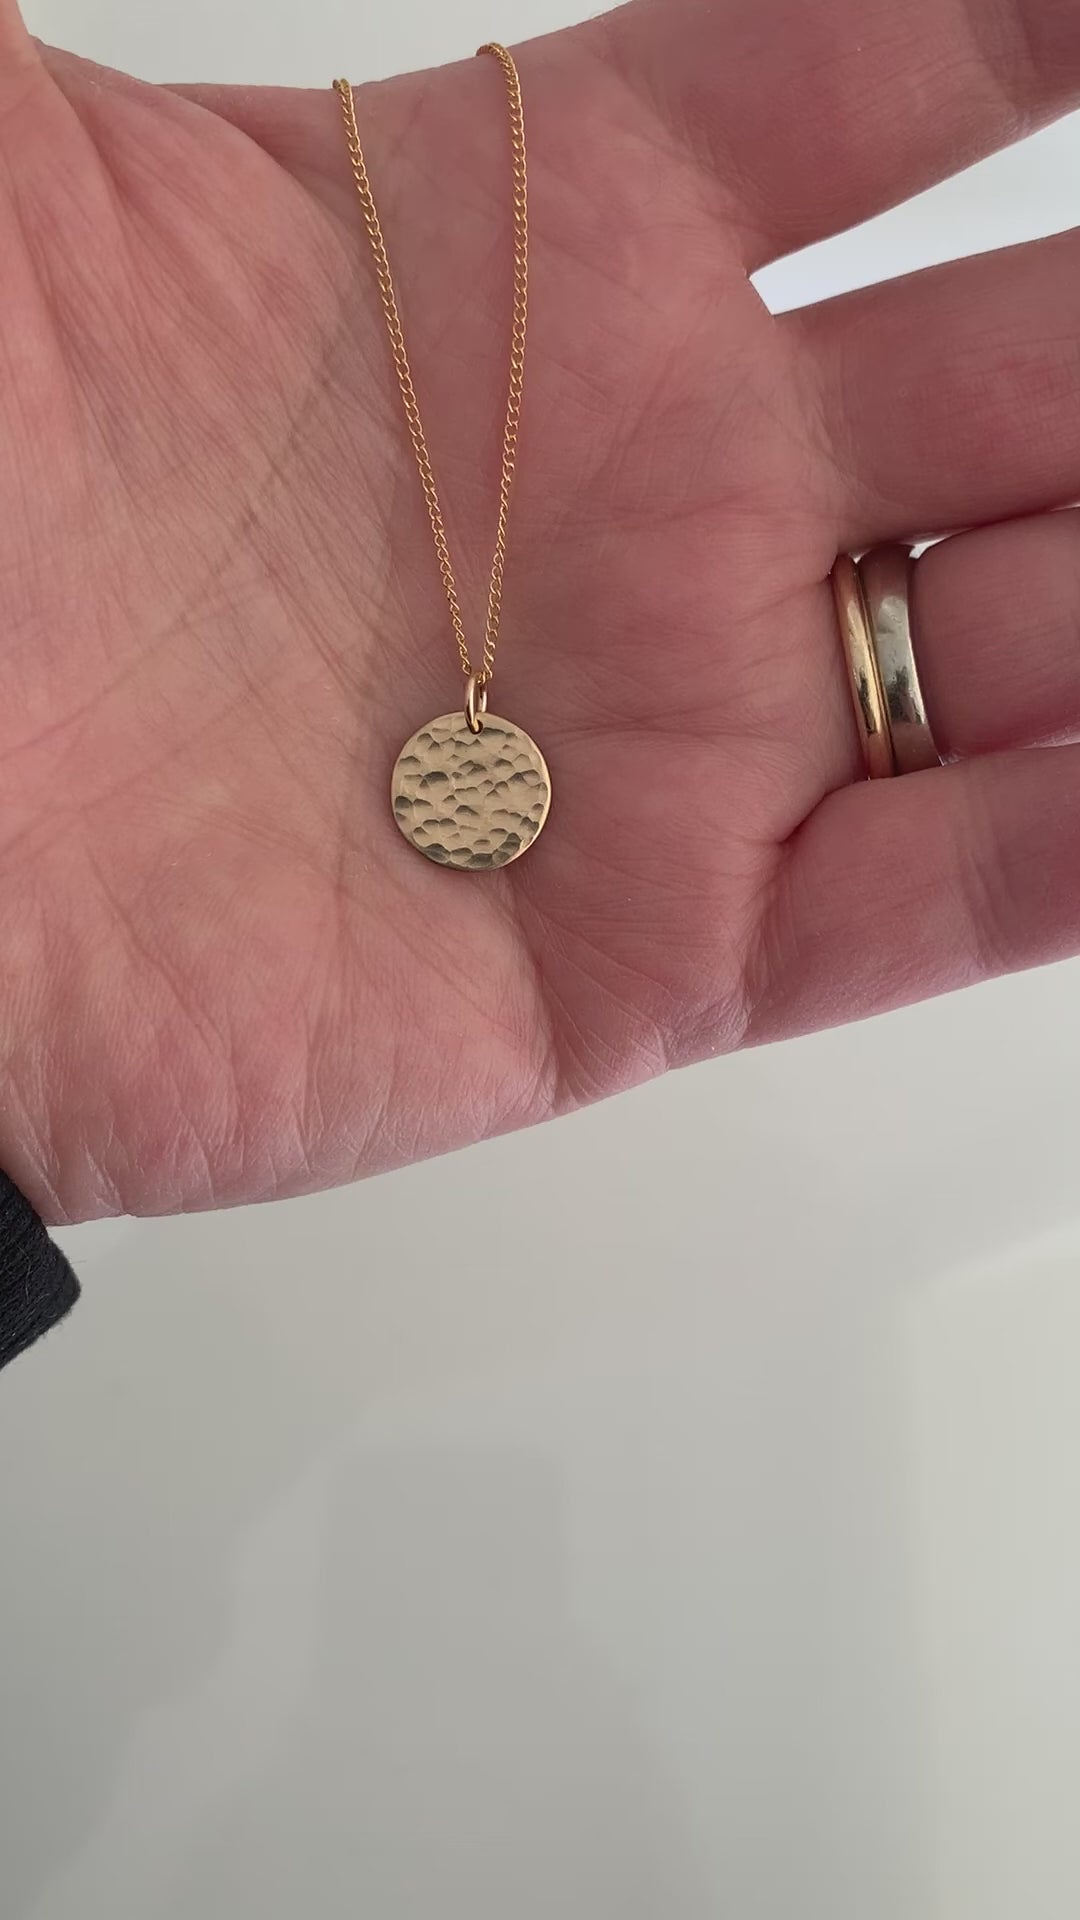 A short video clip of a 14k gold filled hammered disc pendant necklace on a fine curb chain shown held in a hand .  